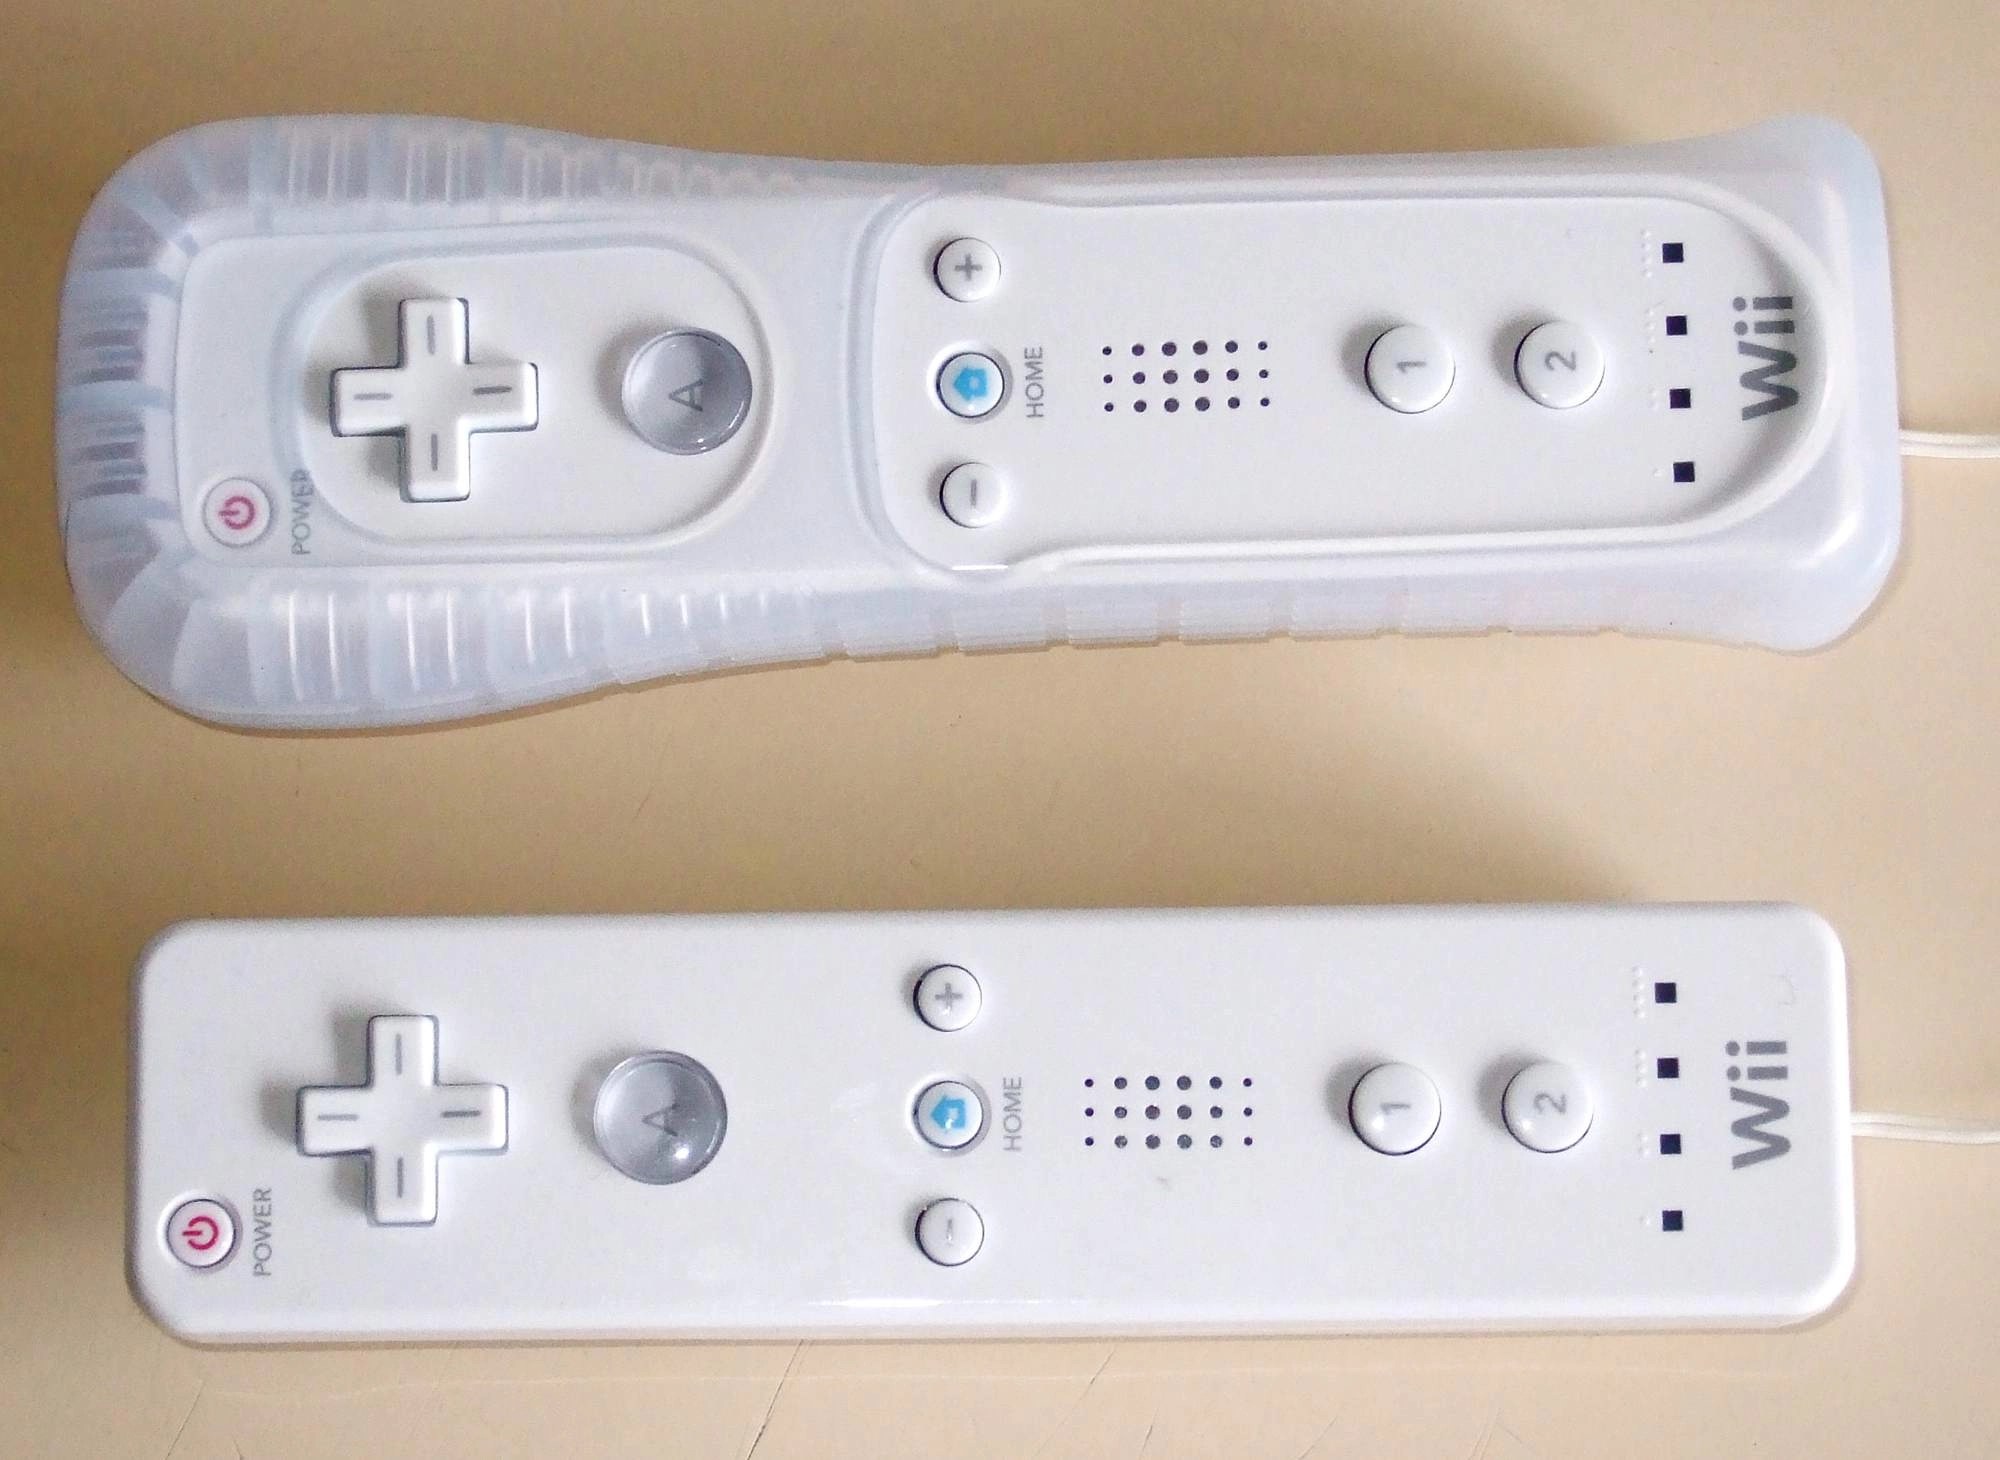 How to Easily Sync a Wii Remote